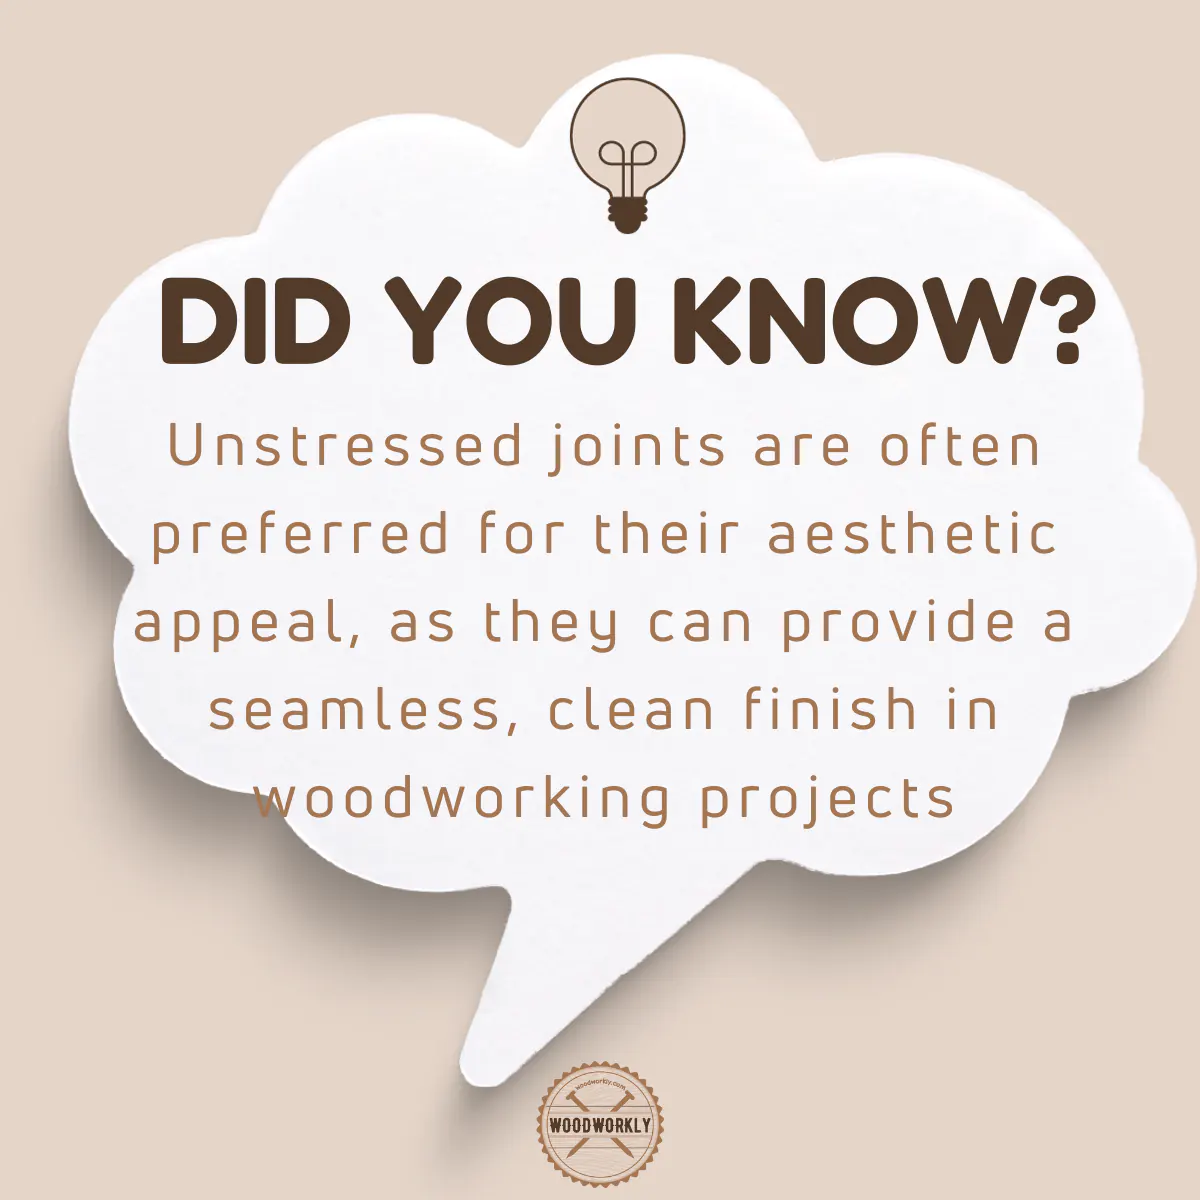 Did you know fact about Unstressed joint